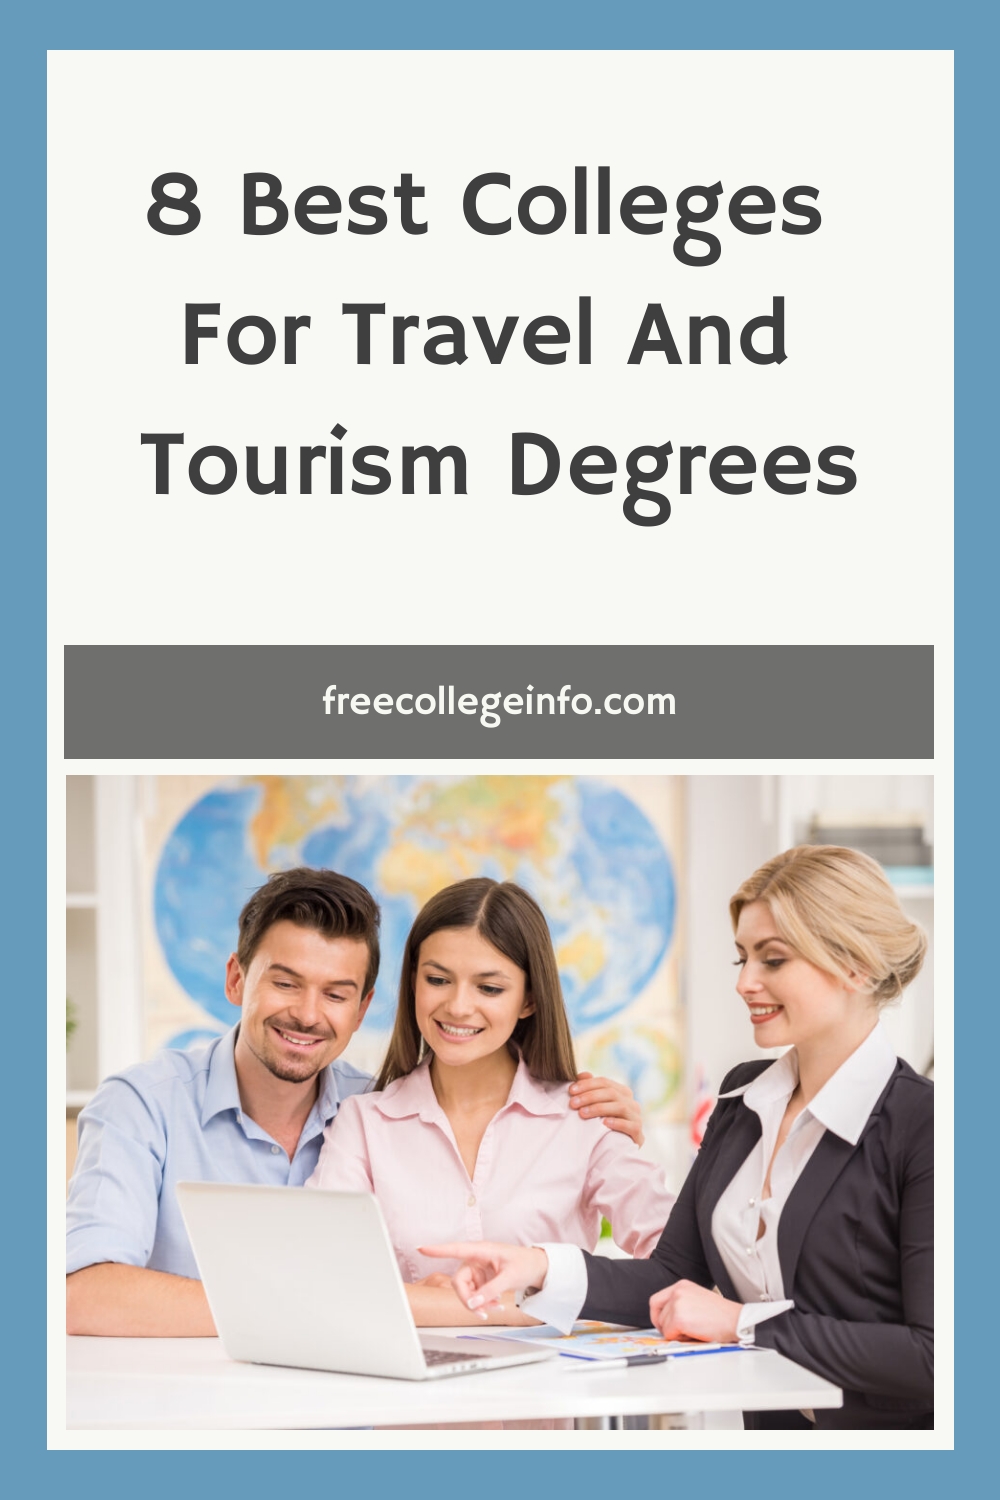 8 Best Colleges For Travel And Tourism Degrees